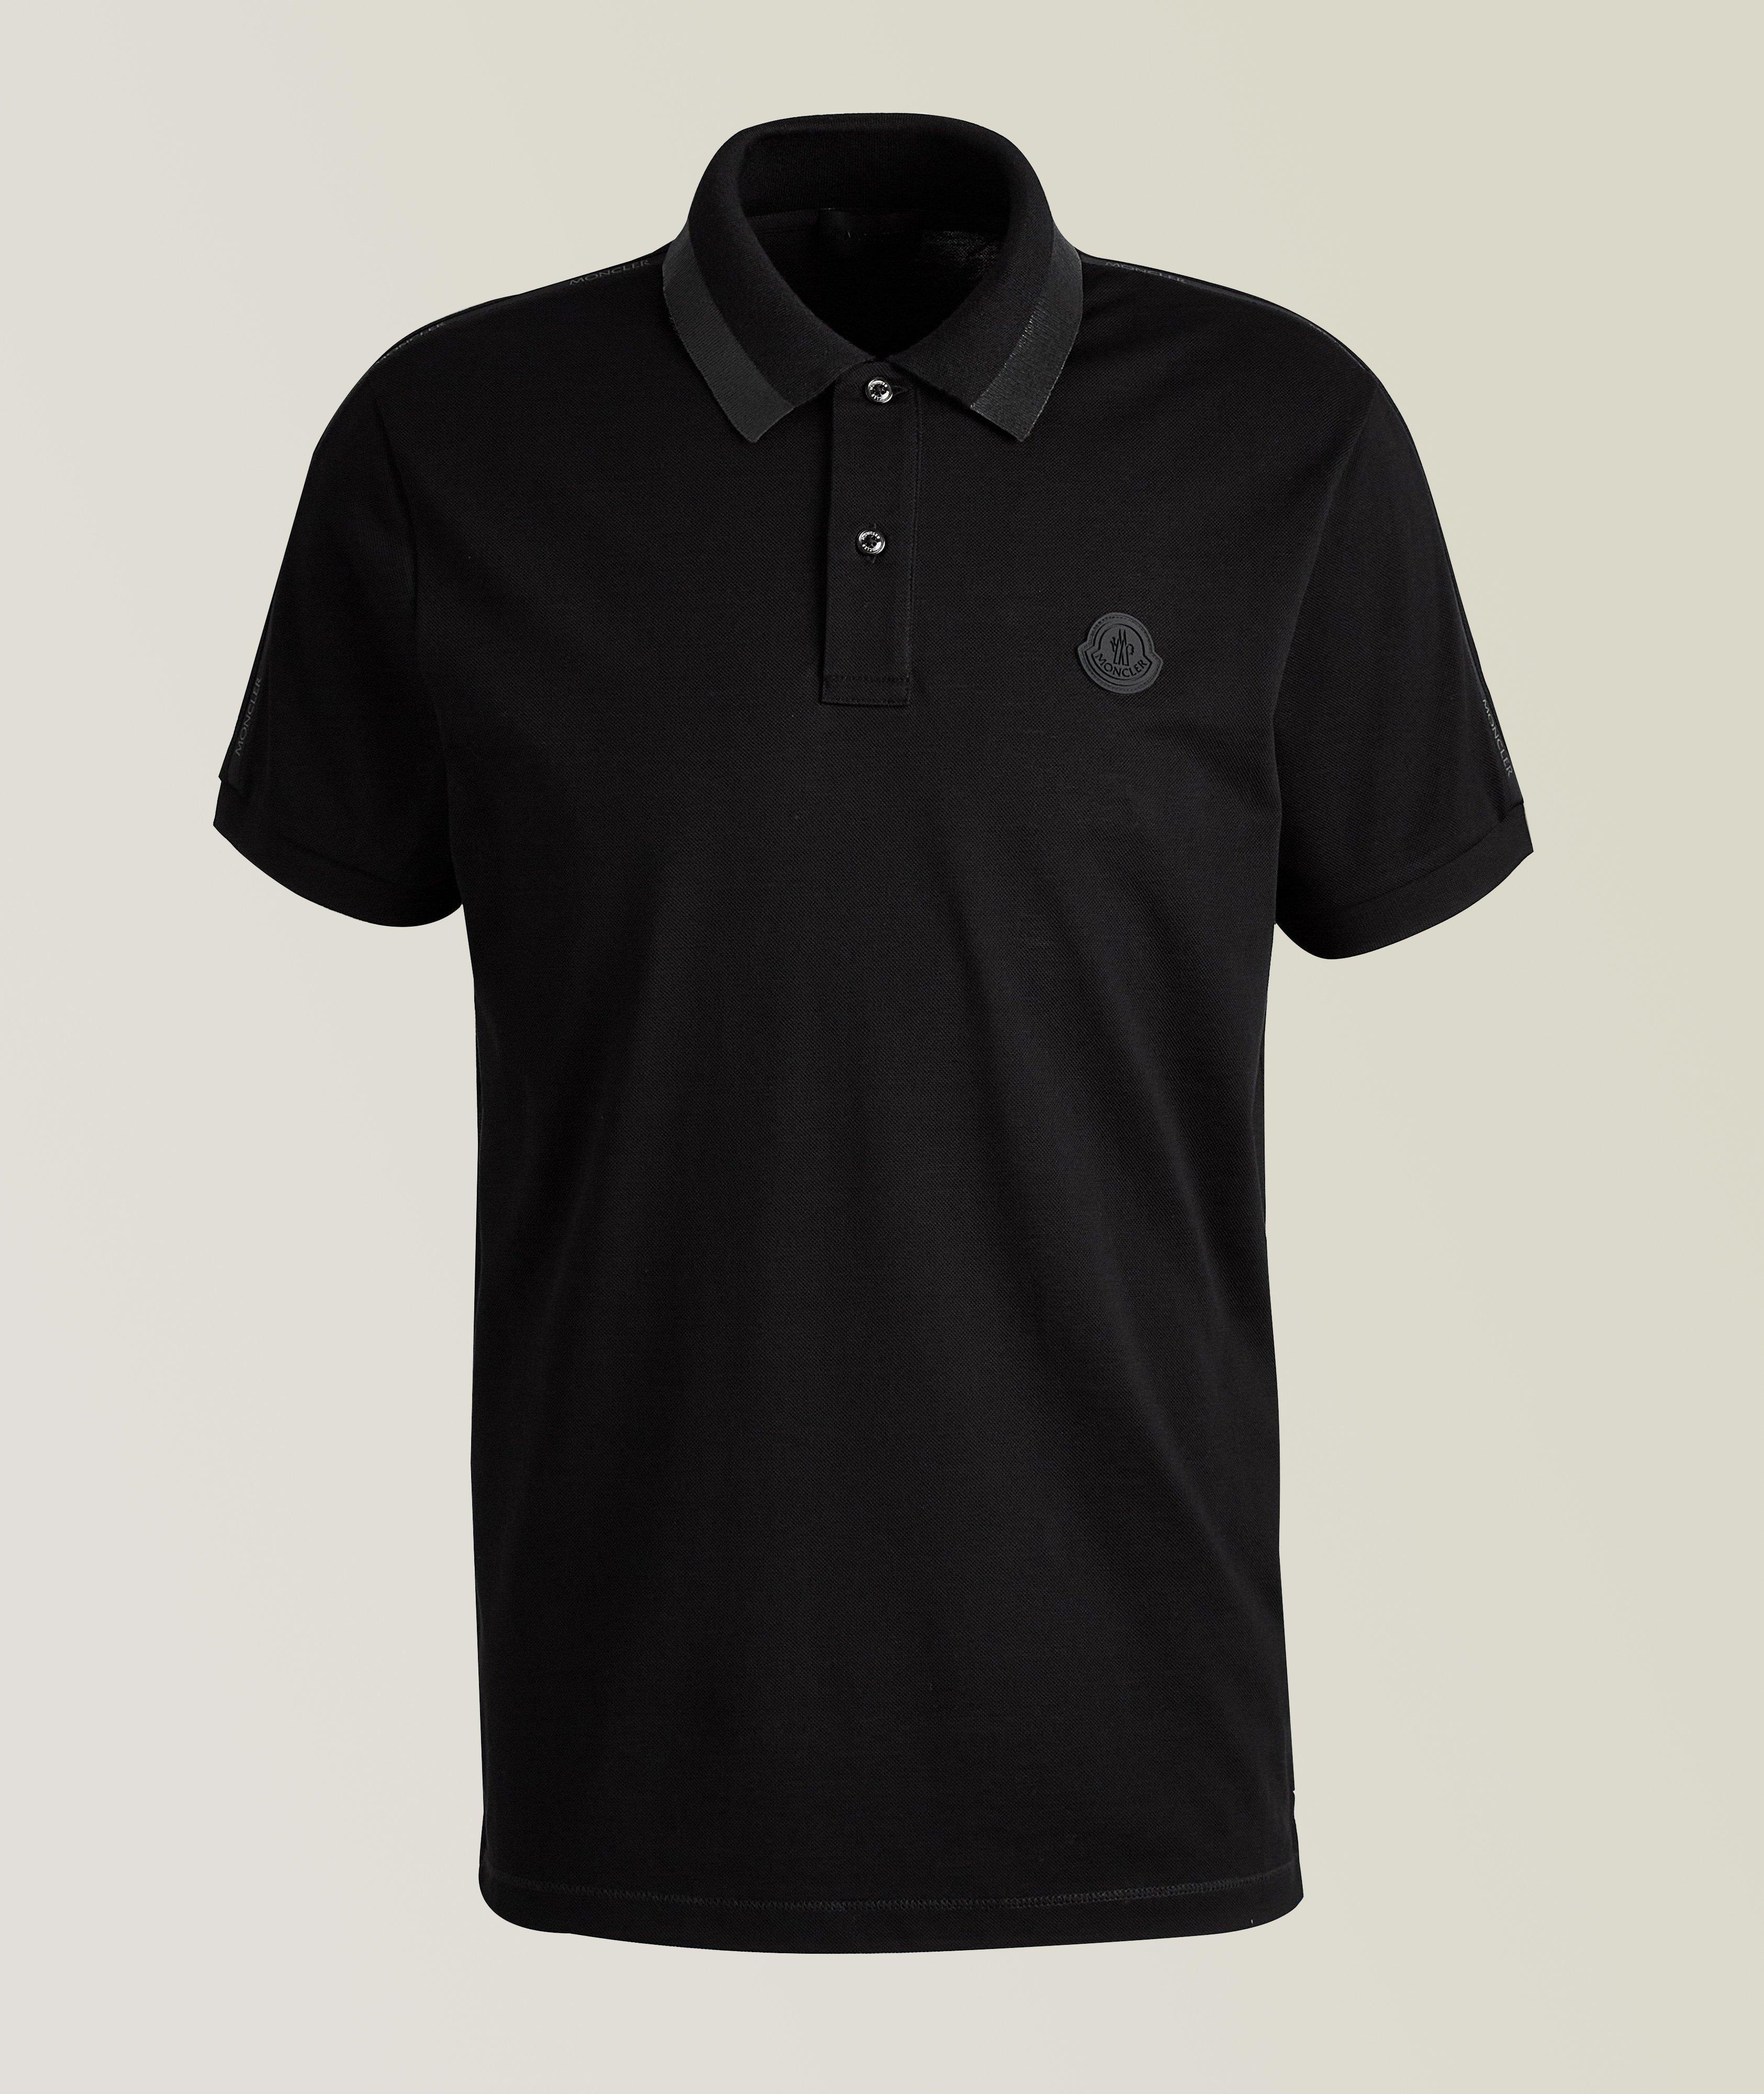 Short-Sleeve Logo Embossed Cotton Pique Polo image 0